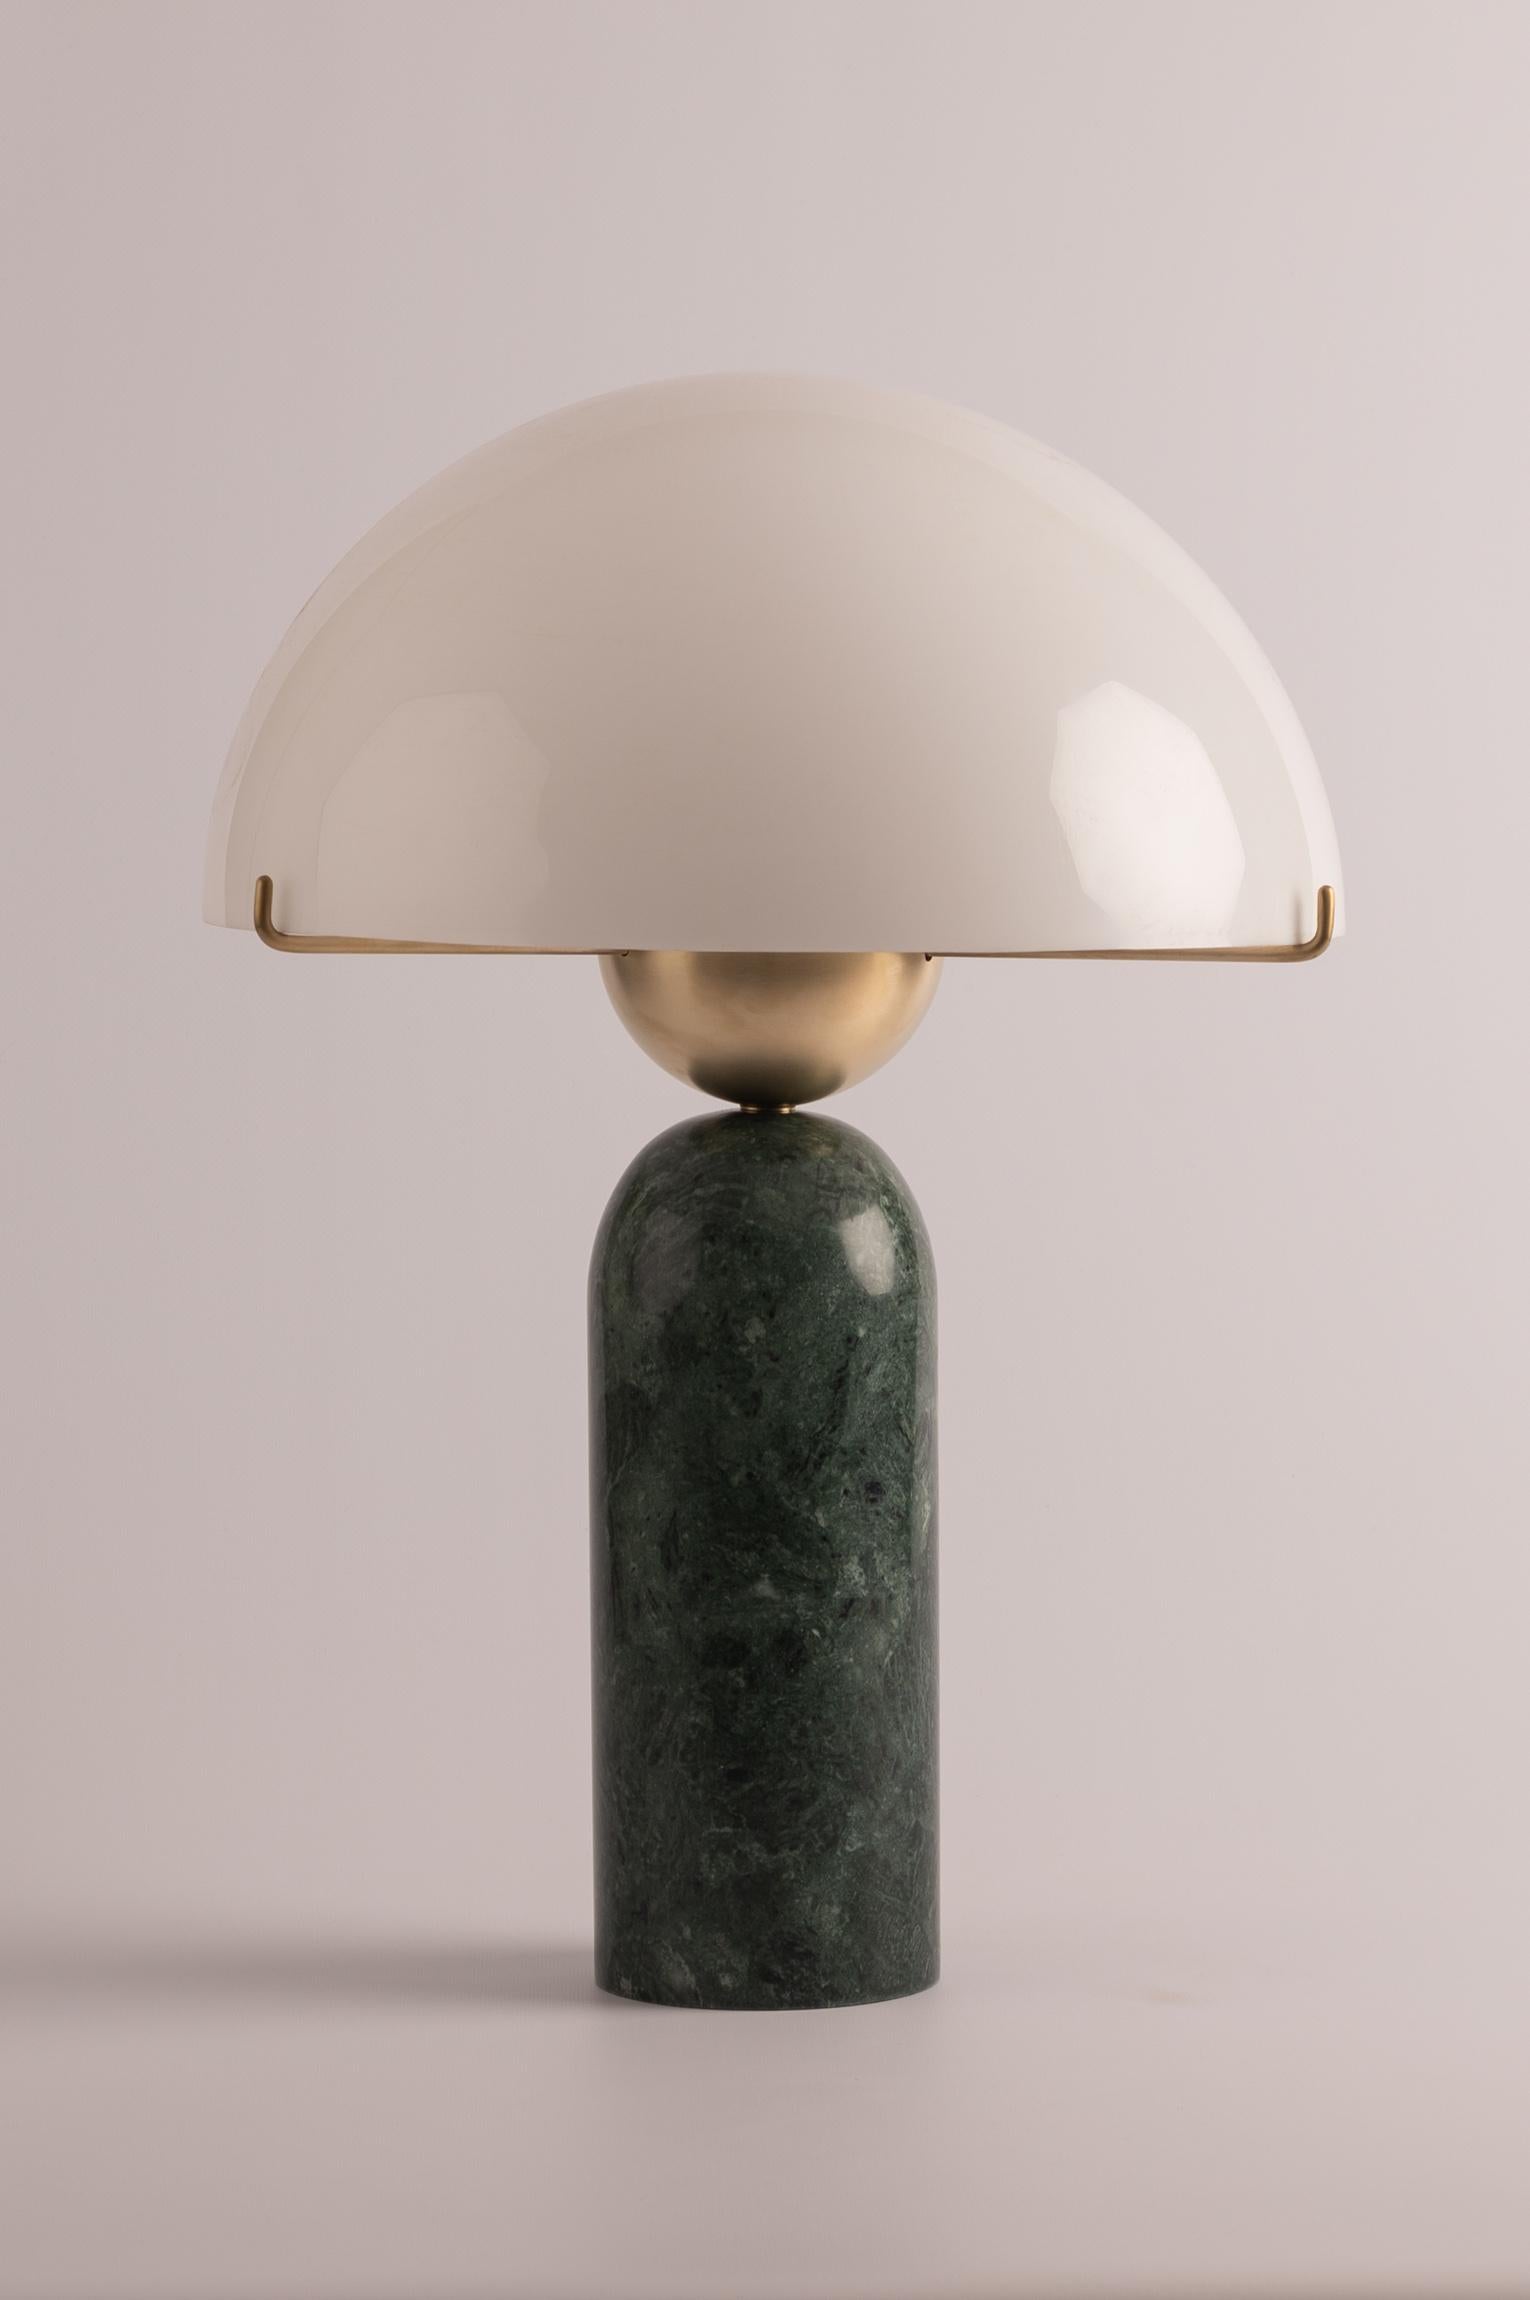 Green Marble Peono Table Lamp by Simone & Marcel
Dimensions: Ø 40.6 x H 61 cm.
Materials: Brass, acrylic and green marble.

Also available in different marble, wood and alabaster options and finishes. Custom options available on request. Please